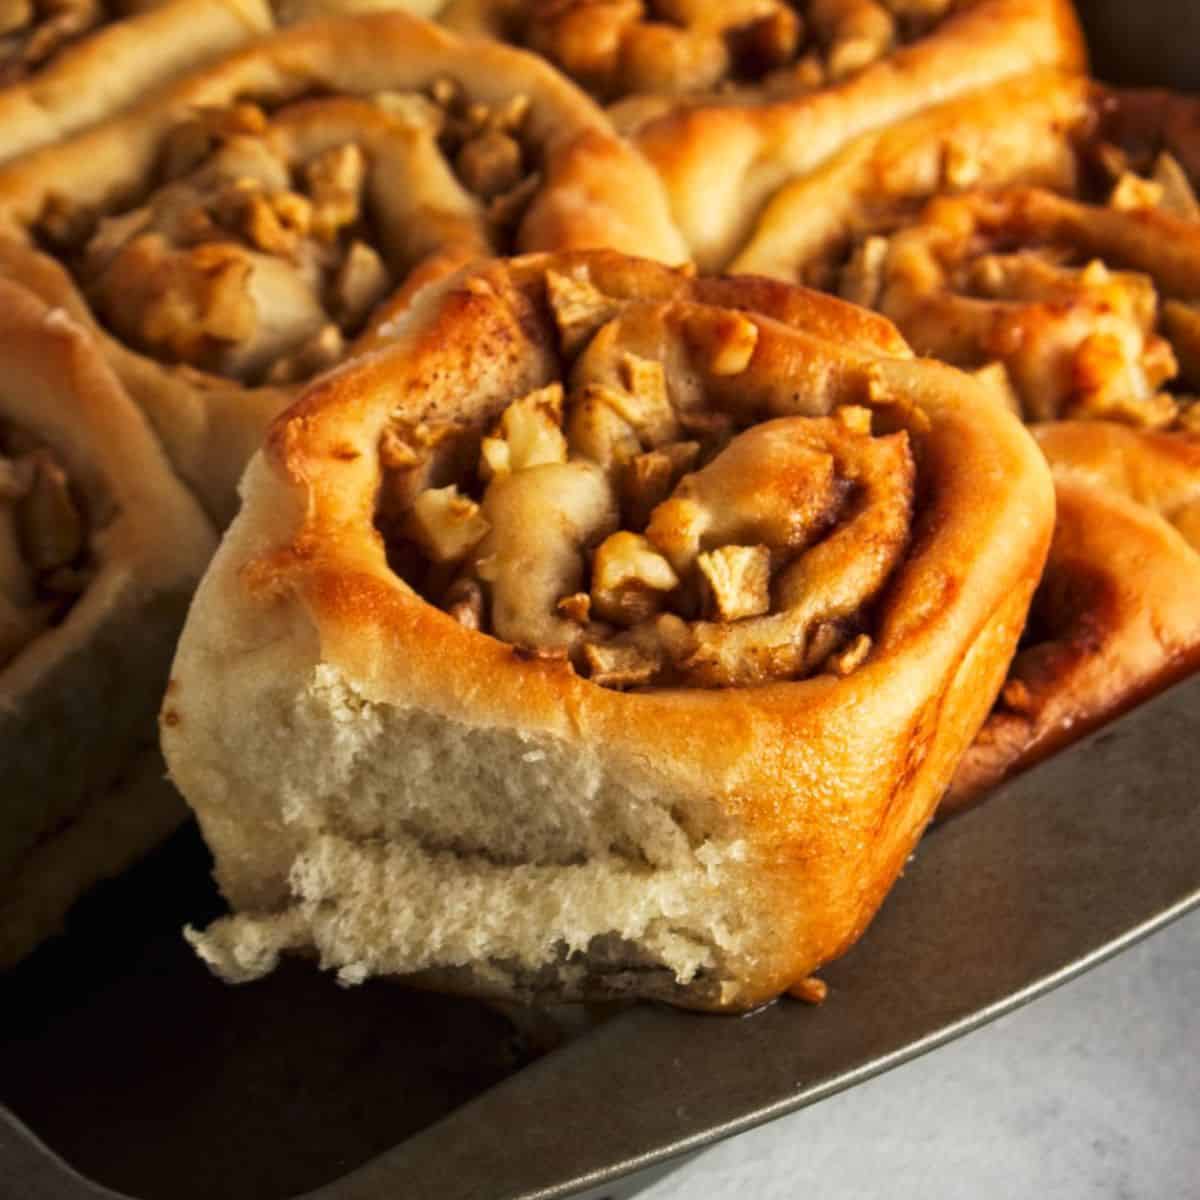 Amazing Cinnamon Apple Sticky Rolls (vegan), incredibly delicious sweet and gooey pastry buns that have no added dairy. Breakfast, brunch, dessert  